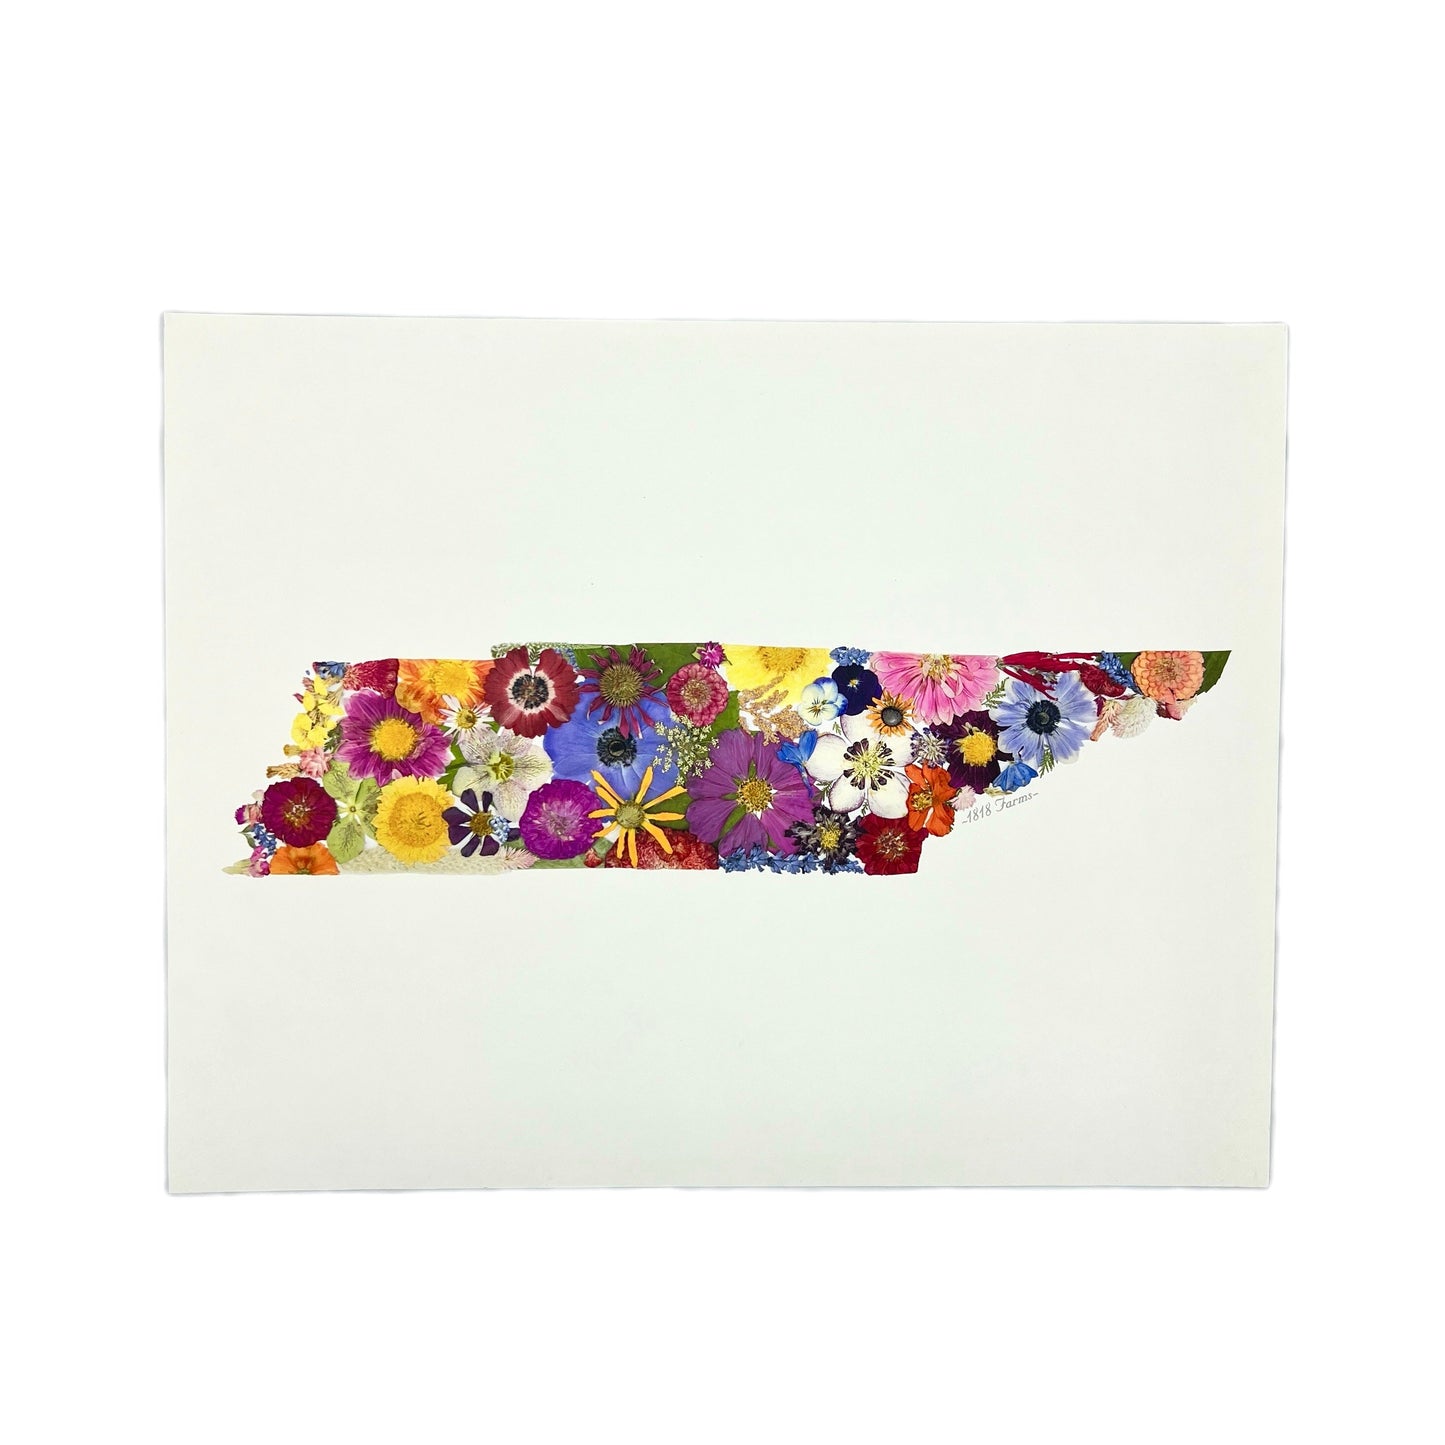 State Themed Giclée Print  - "Where I Bloom" Collection Giclee Art Print 1818 Farms 8"x10" Tennessee 